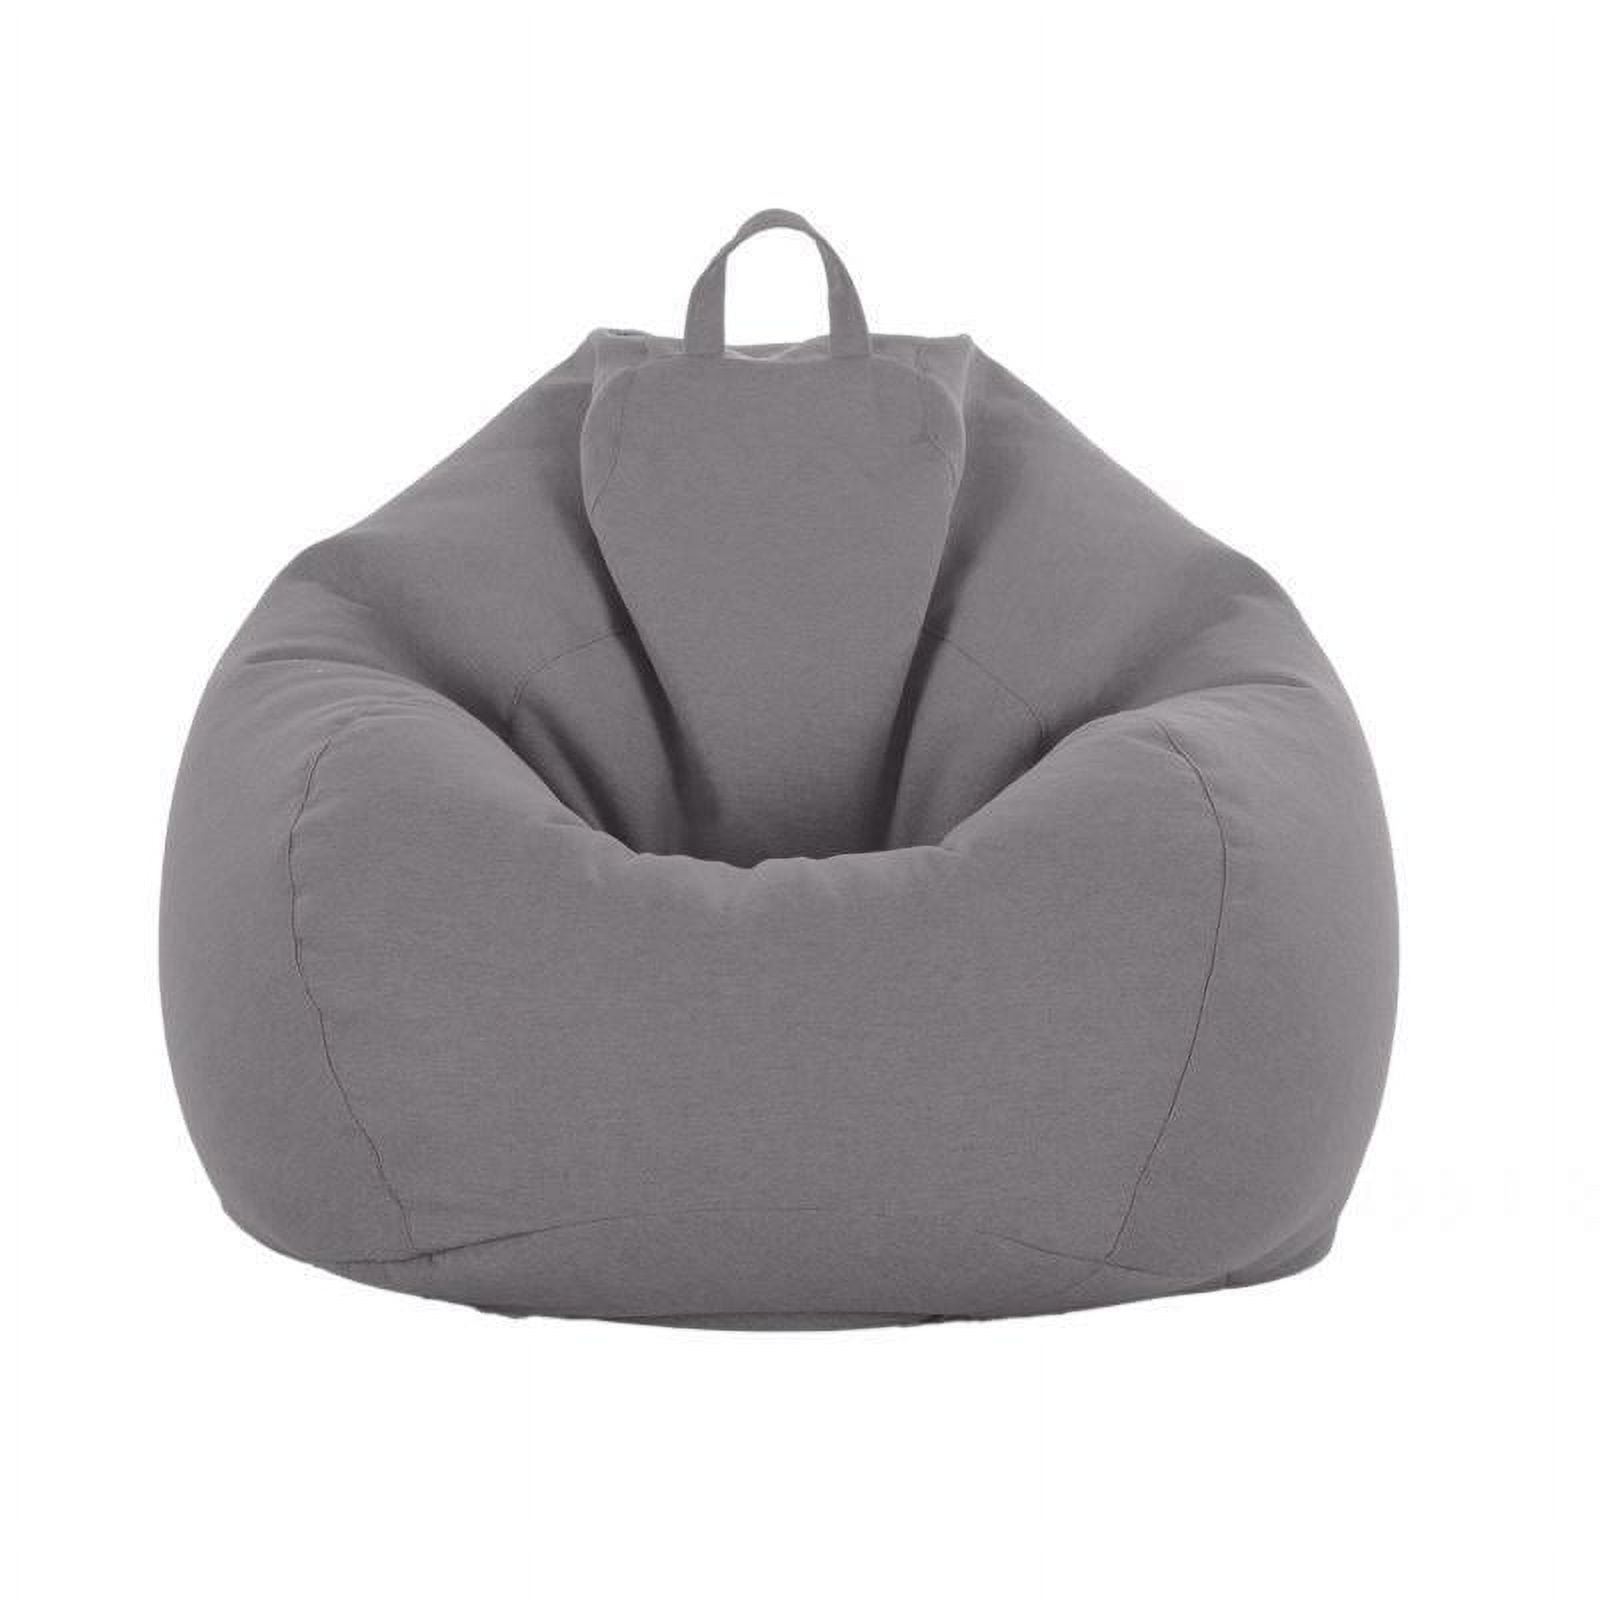  Bean Bag Chairs for Adults and Kids,Storage Bean Bag Chair Coat  ,No with Filling,Blue,80*100cm : Home & Kitchen